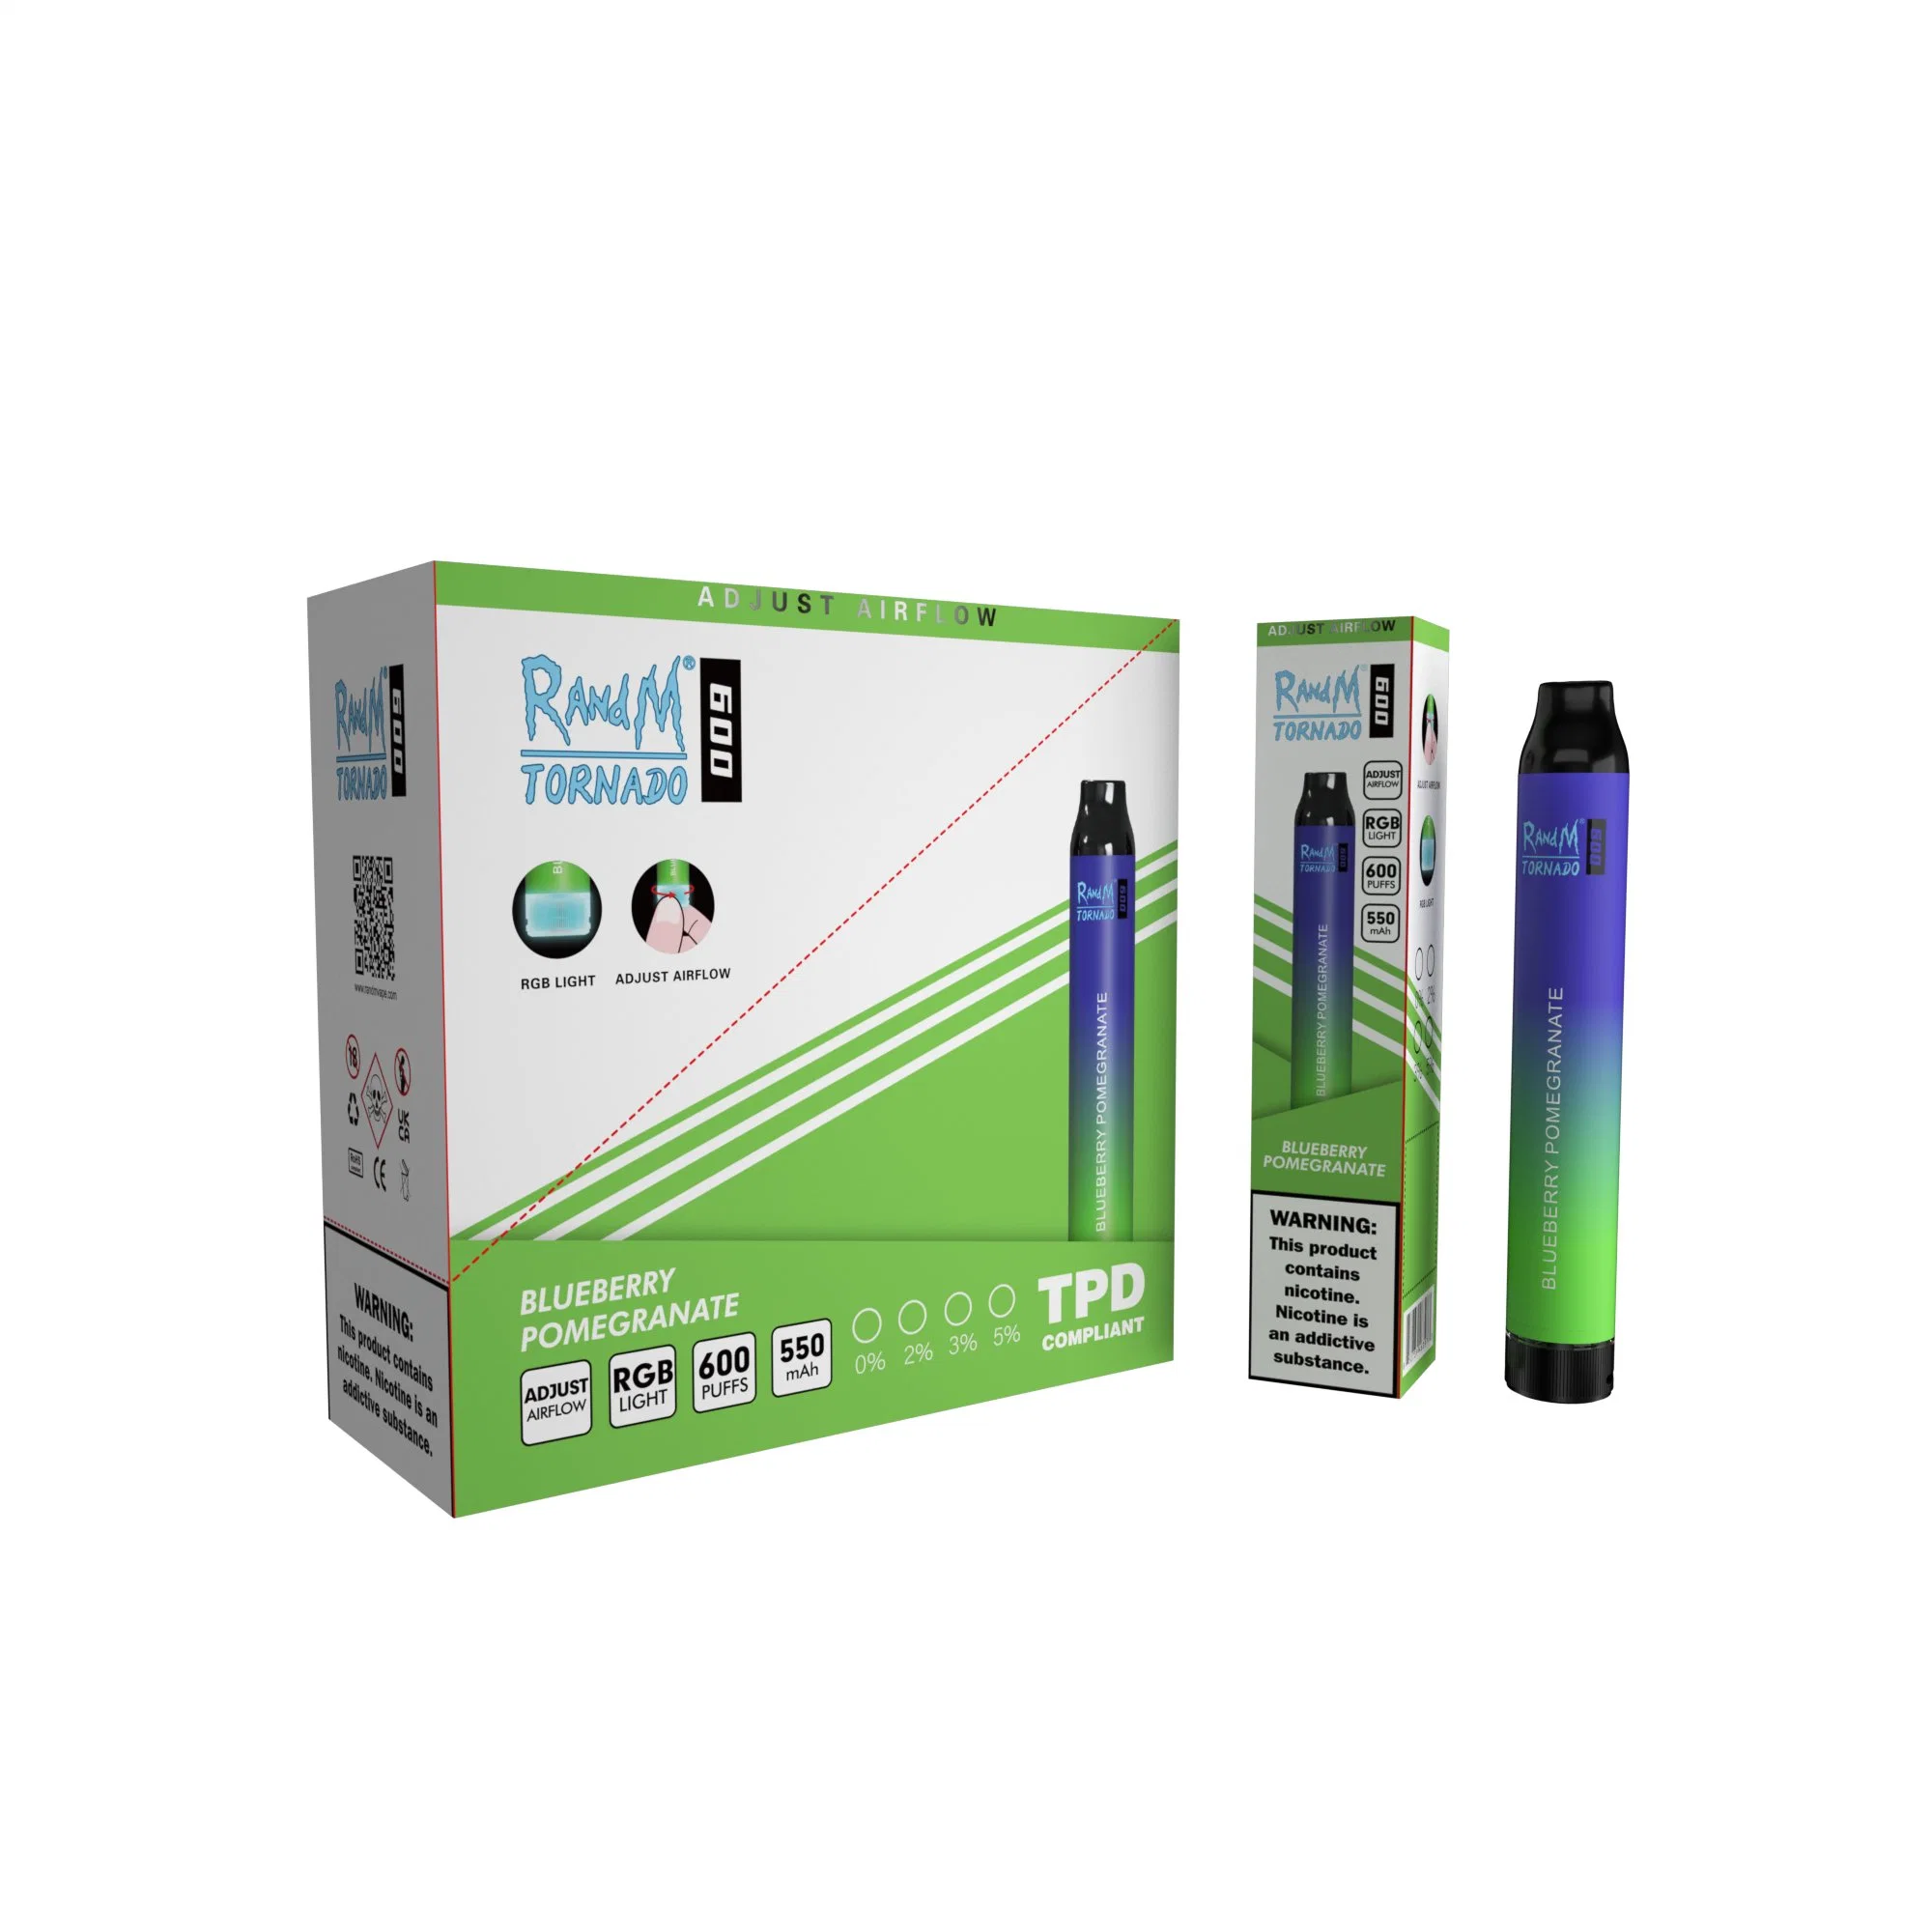 Airflow Adjustable Disposable Vape Randm Tornado 600 Puffs with Tpd Certificate.